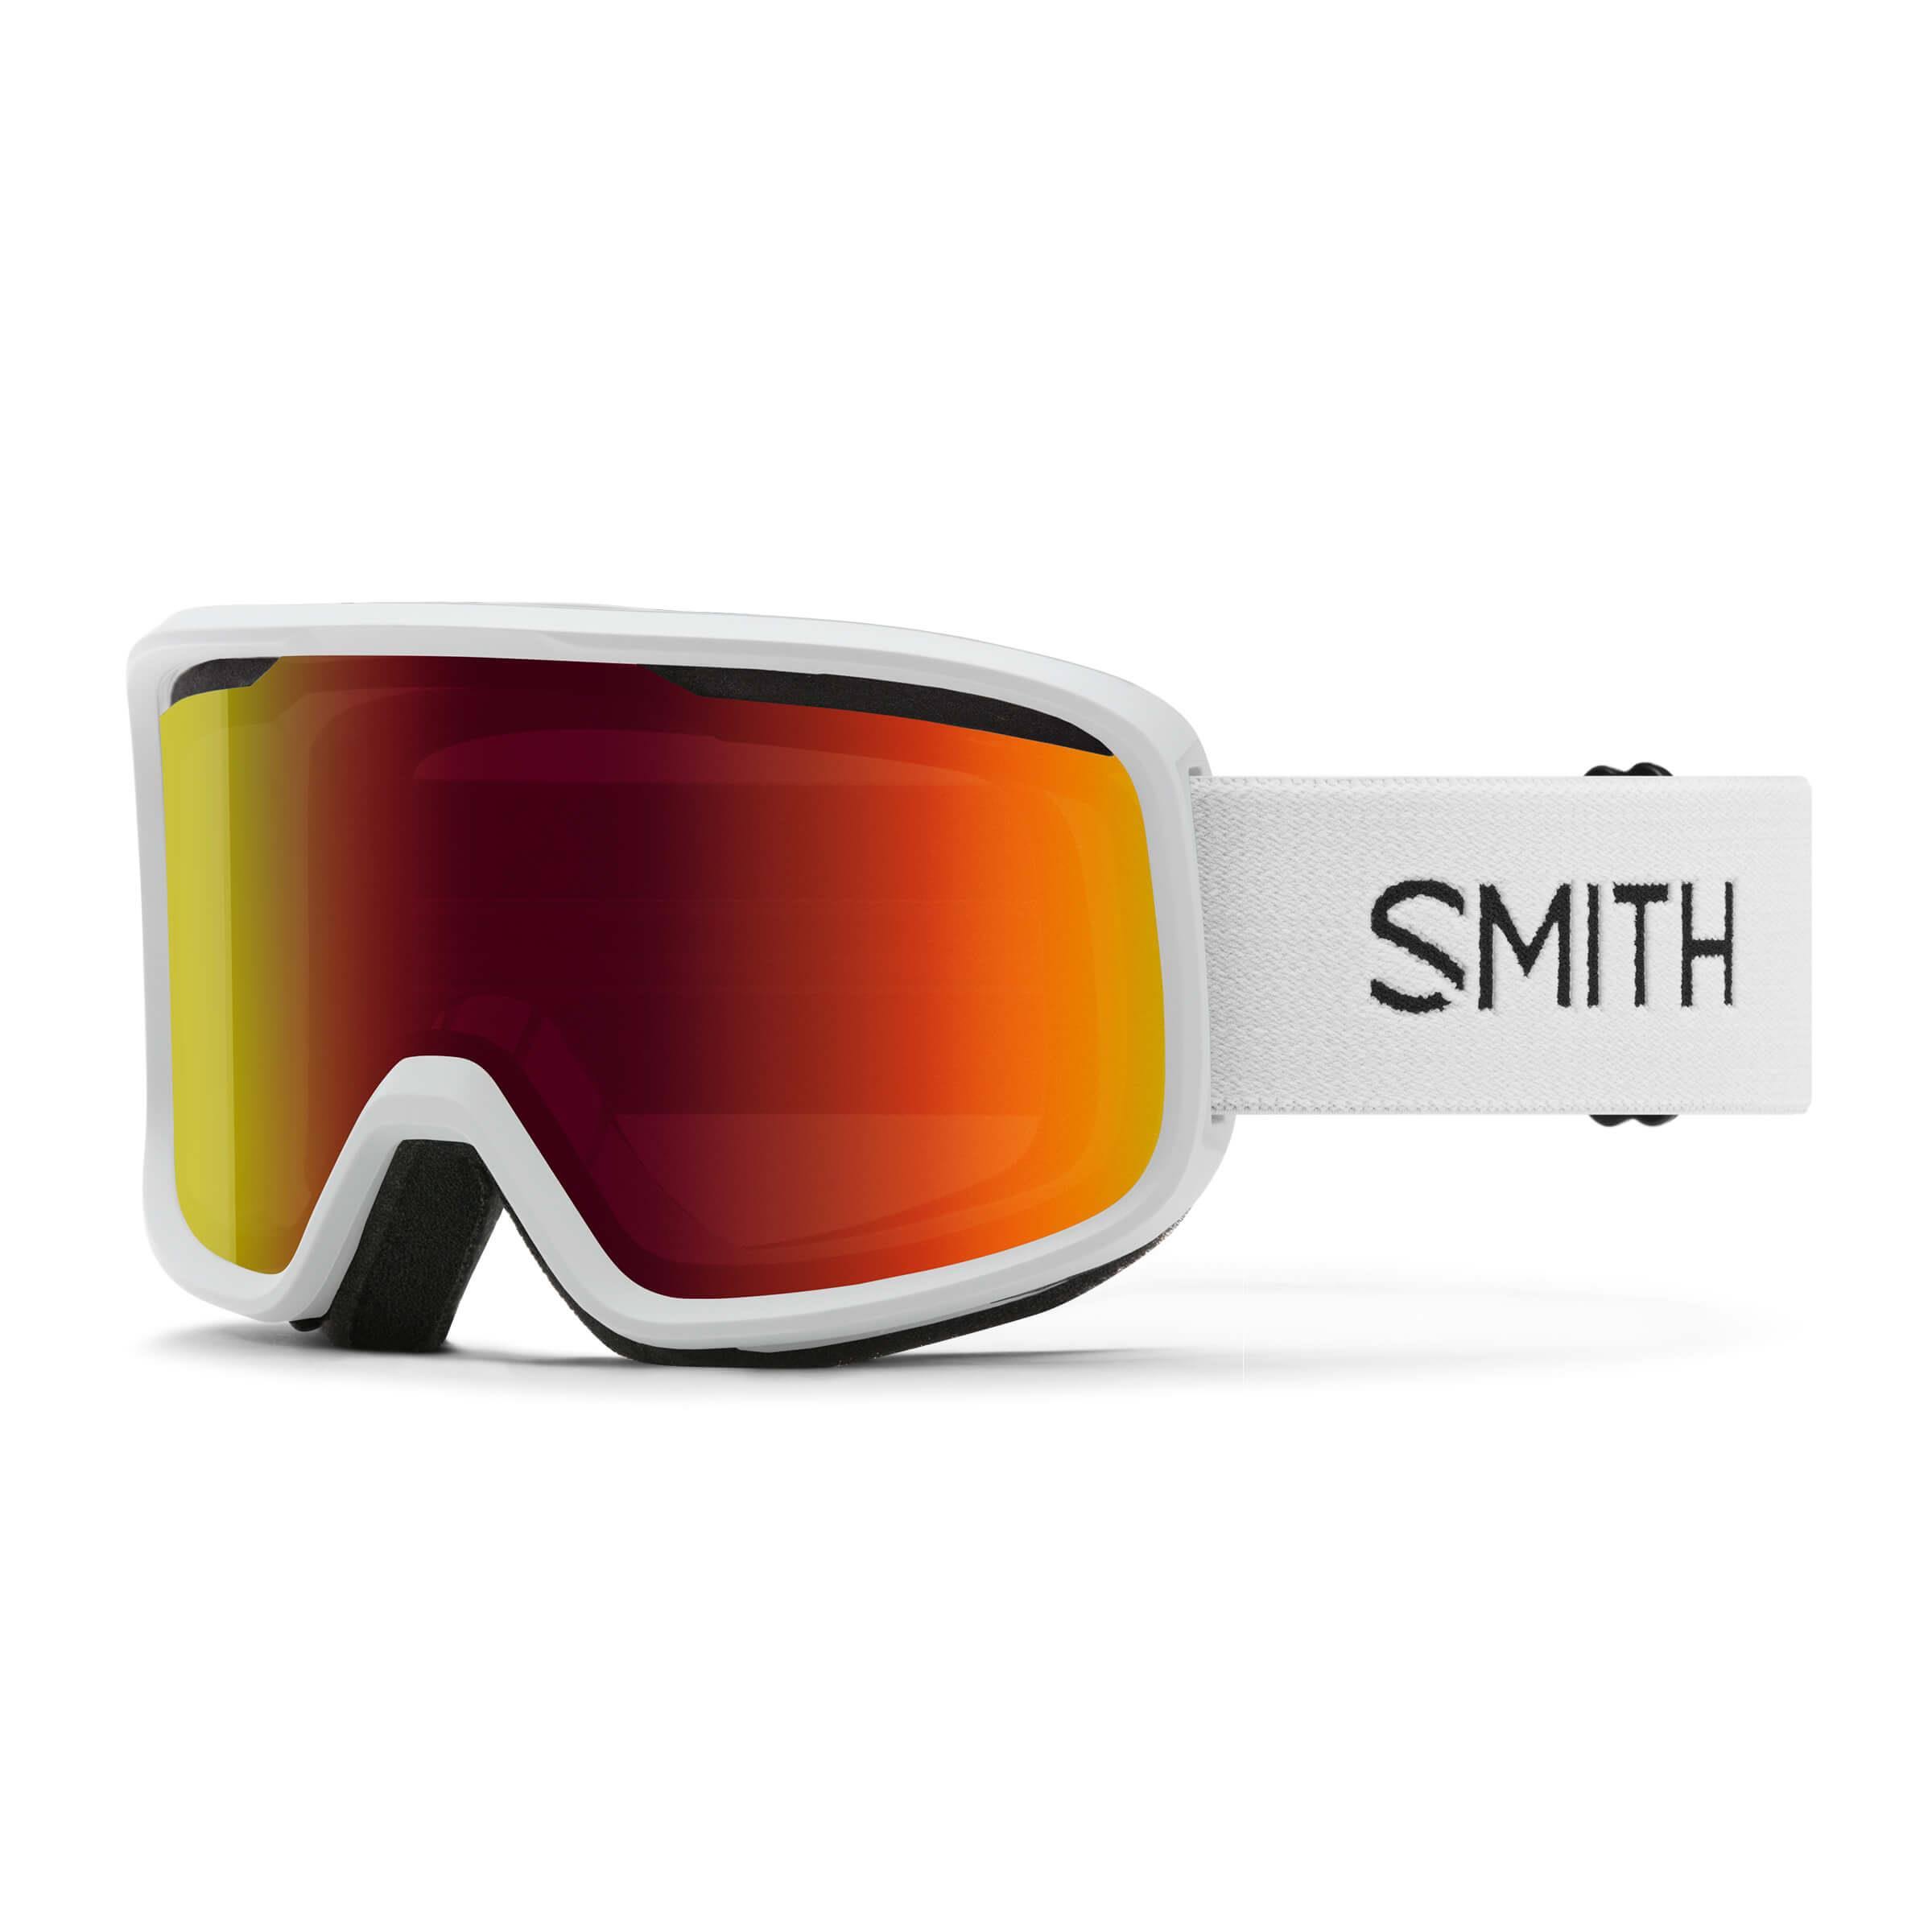 Smith Frontier Snow Goggles - White Red Sol-X Mirror